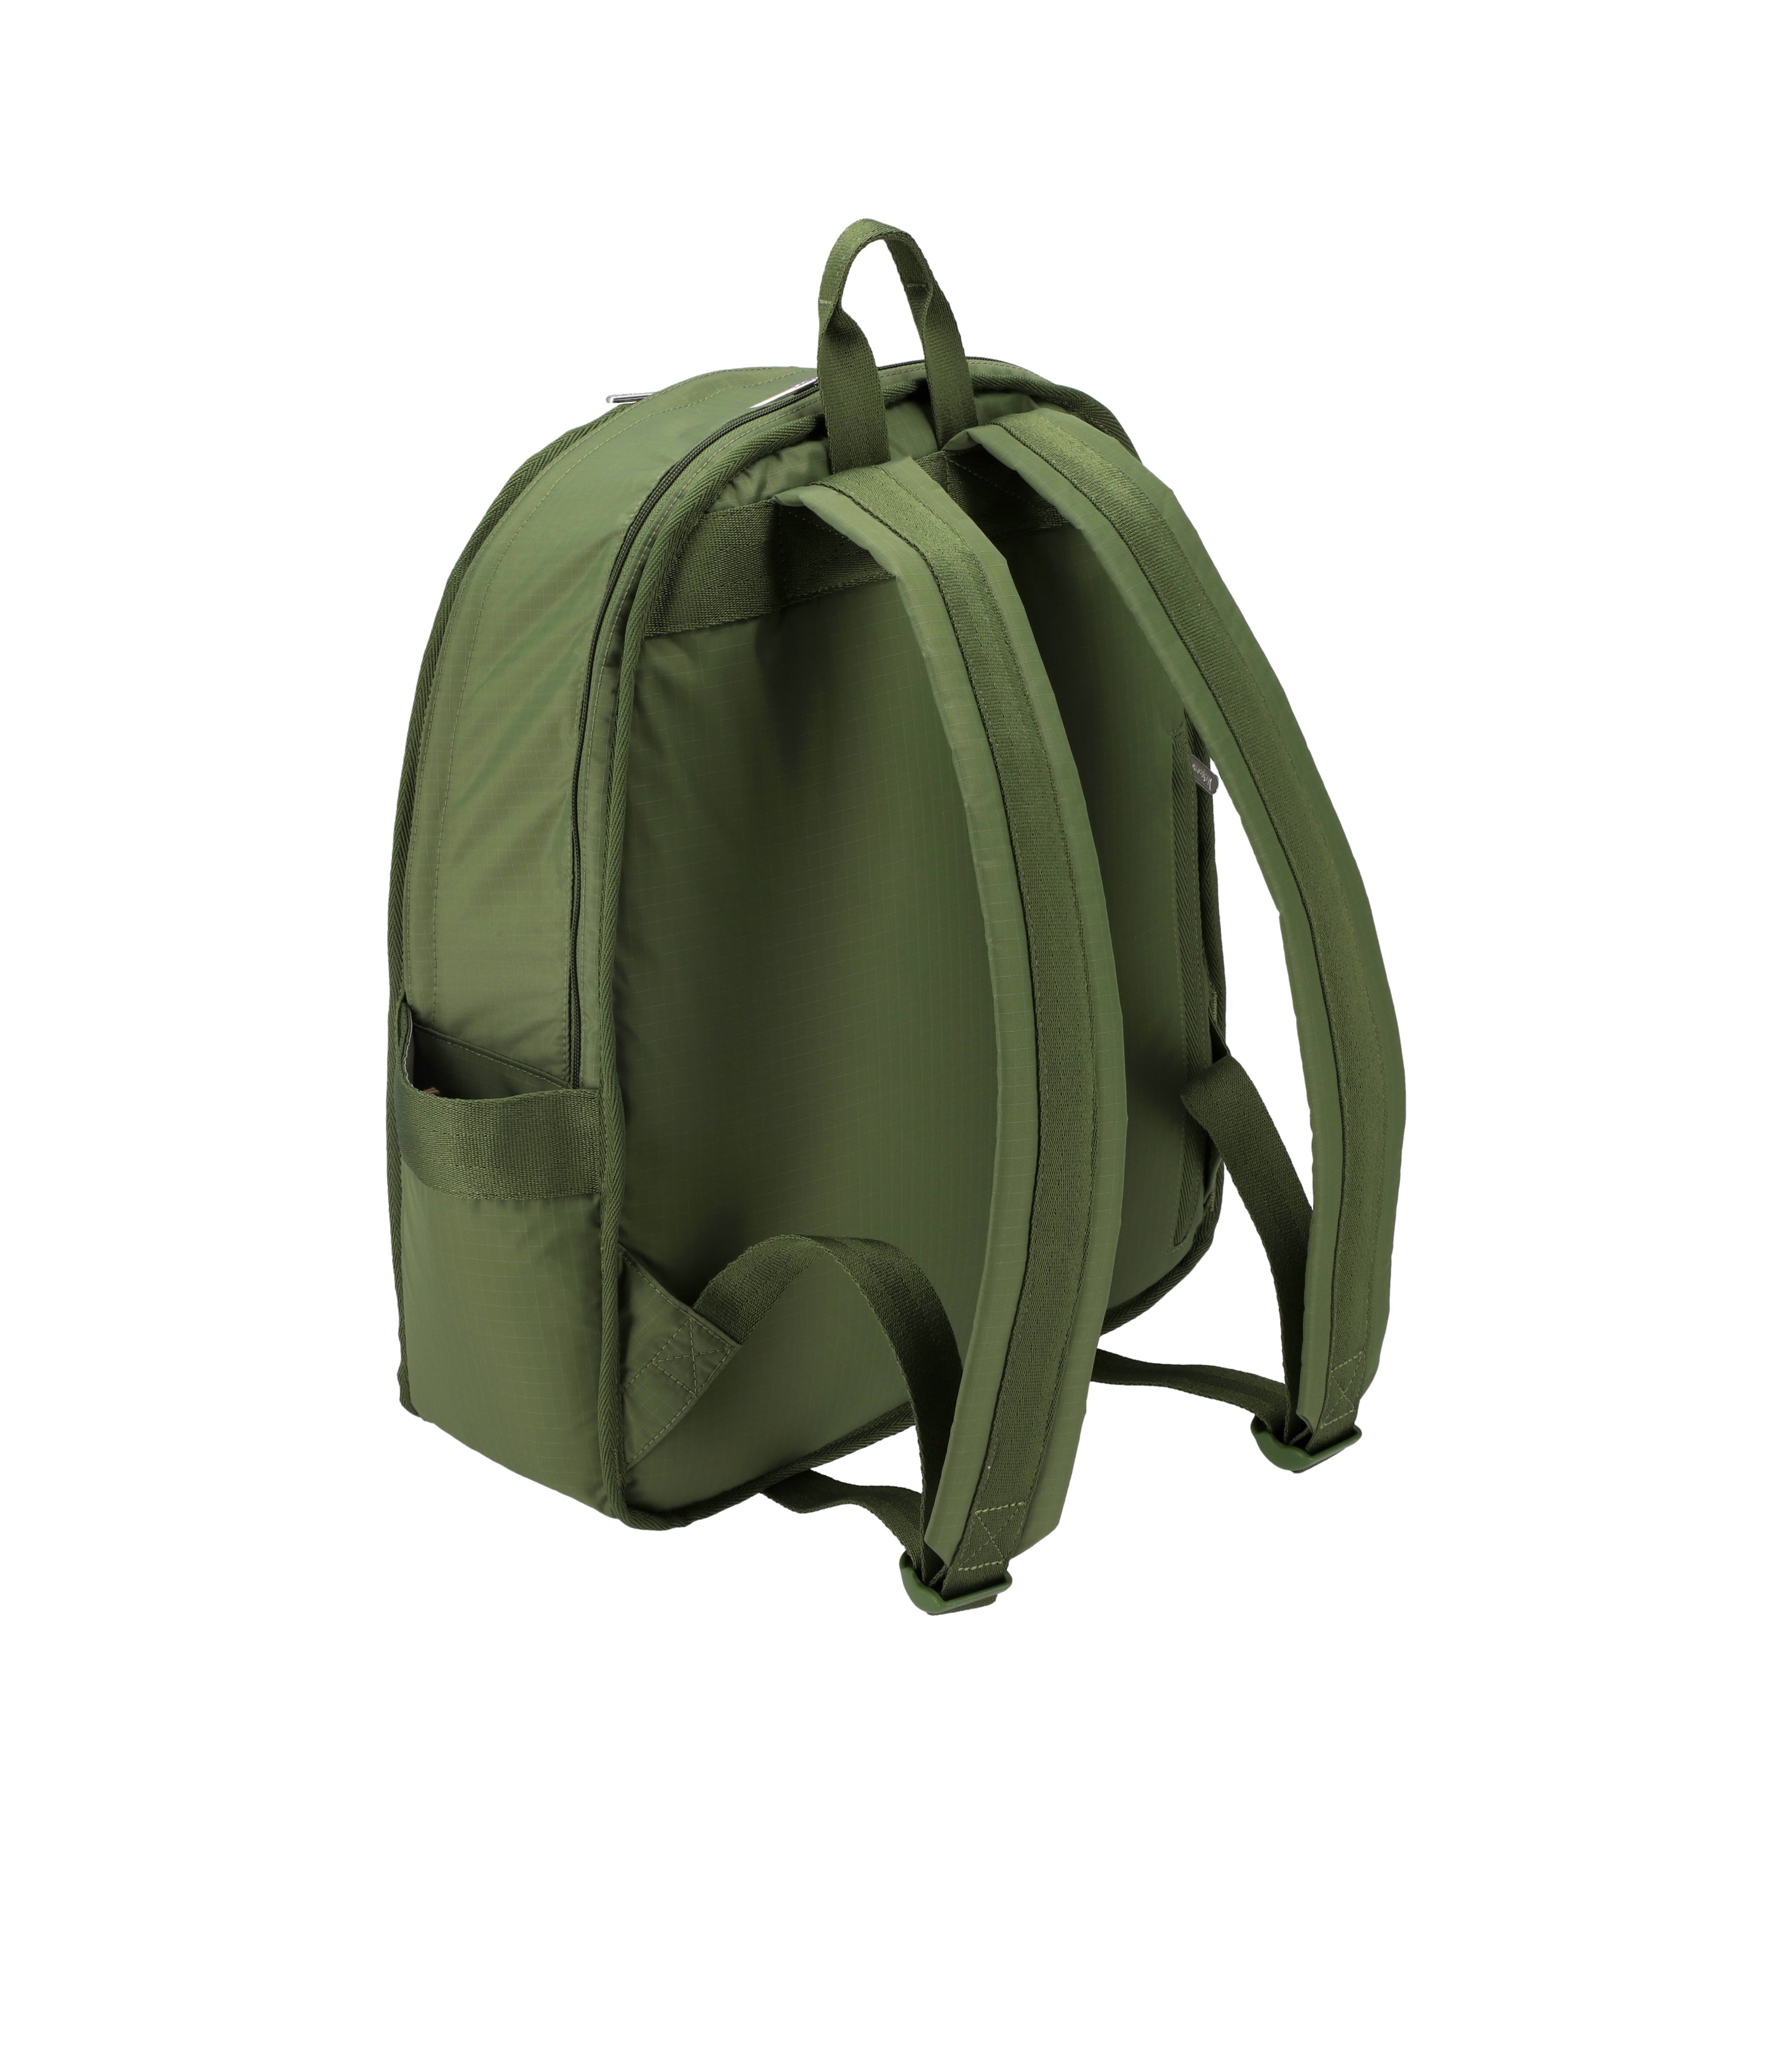 Route Backpack - Olive solid – LeSportsac